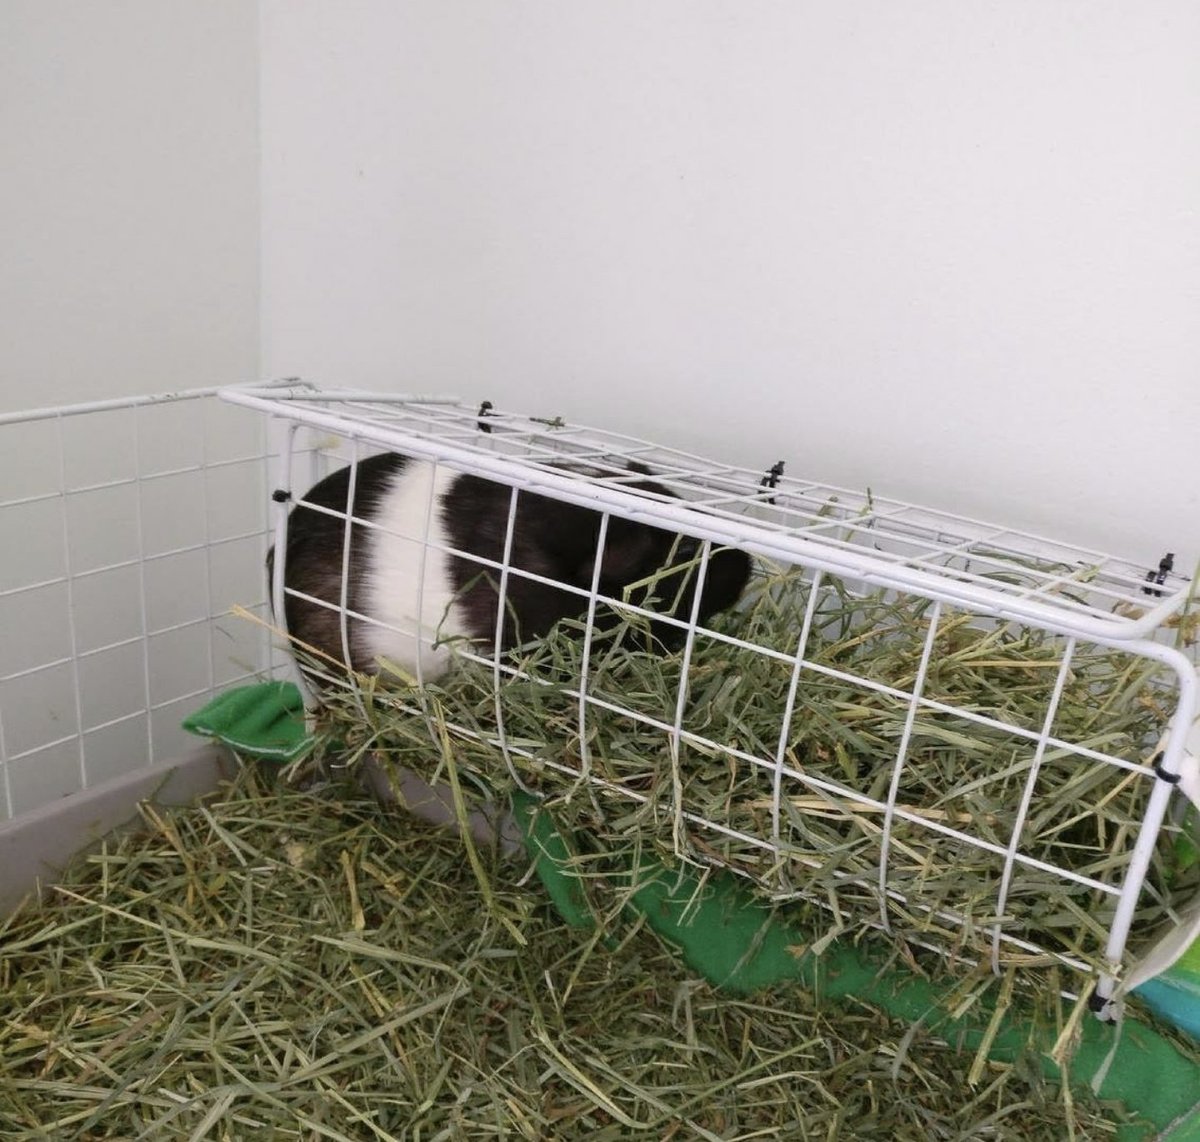 kevin/kev- my first pig- wanted a guinea pig named kevin but they only had females... didn't give a shit- literally always up in my damn business- always doing smth she shouldn't be - my actual bb even tho she tries to murder me when i trim her nails- lazy- top of the herd